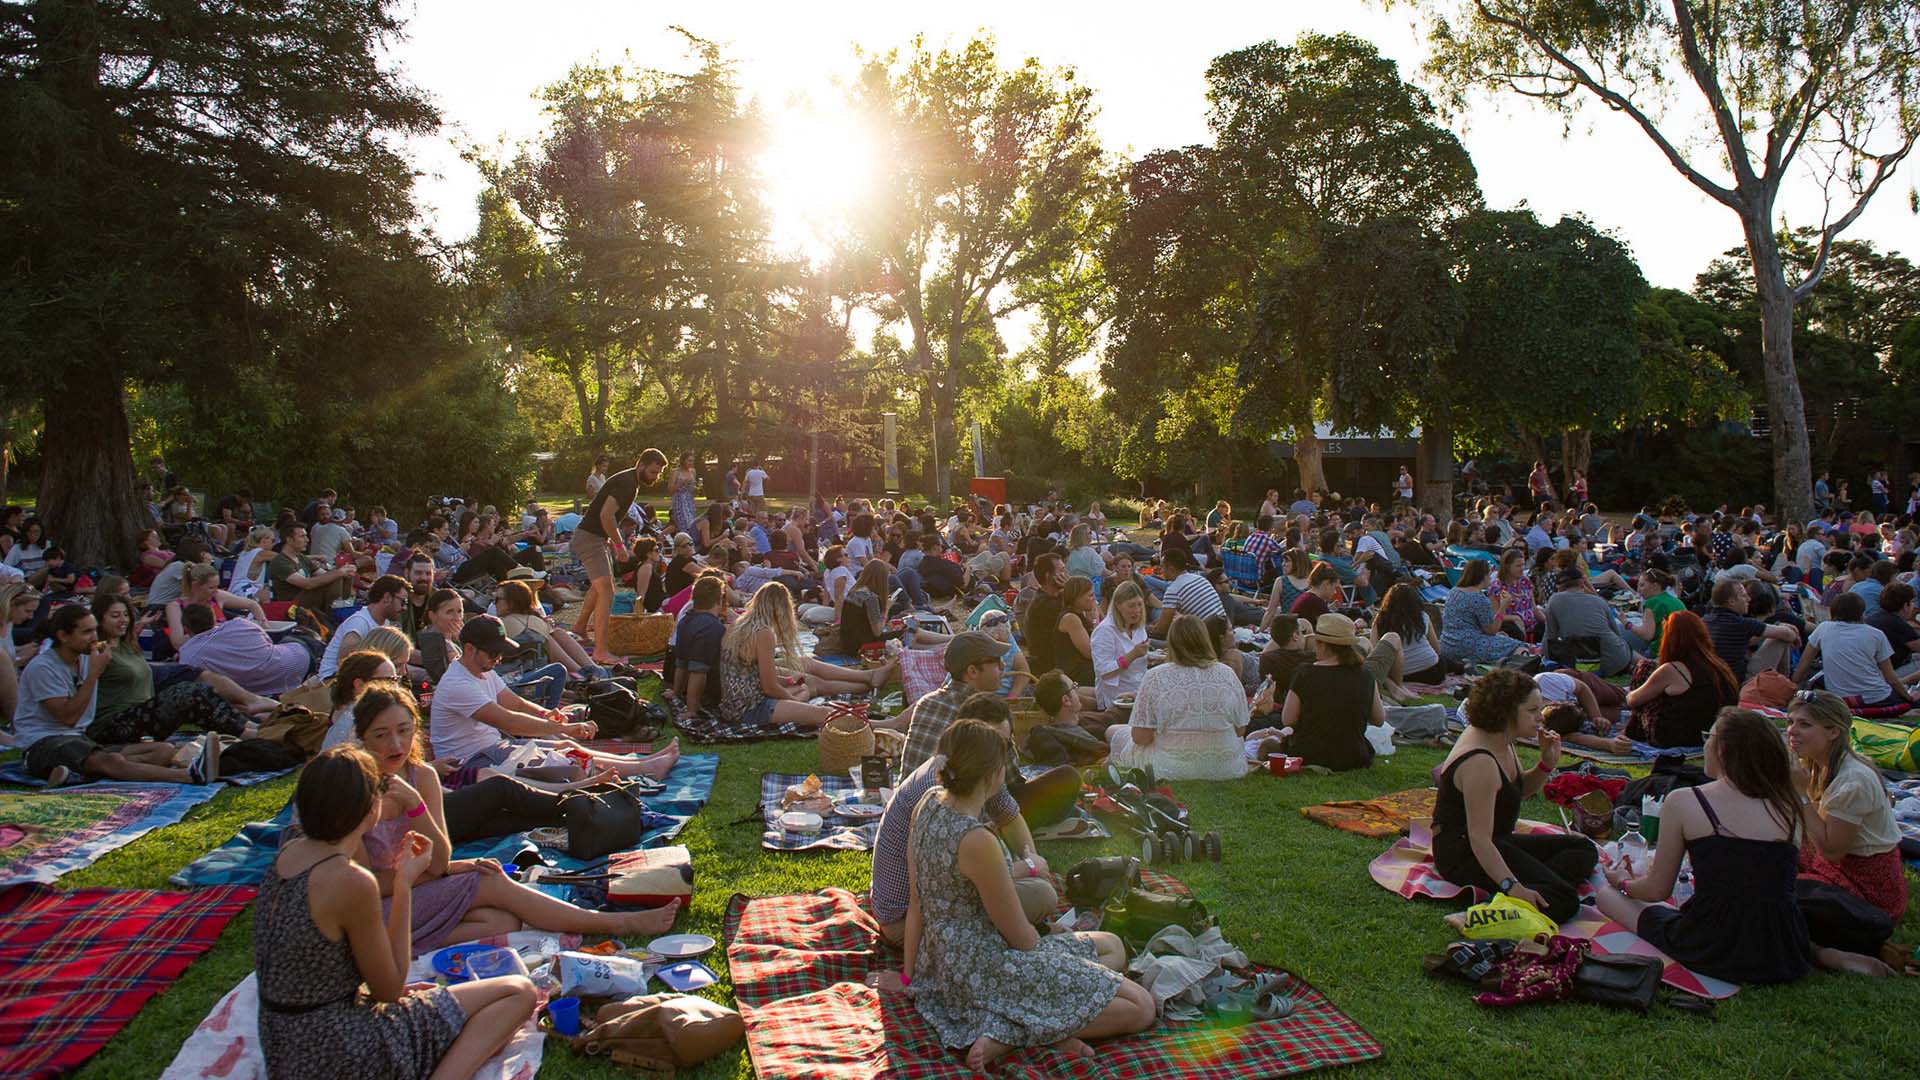 Melbourne Zoo Is Setting Up an Outdoor Cinema If You'd Like to Watch Flicks Surrounded by Animals